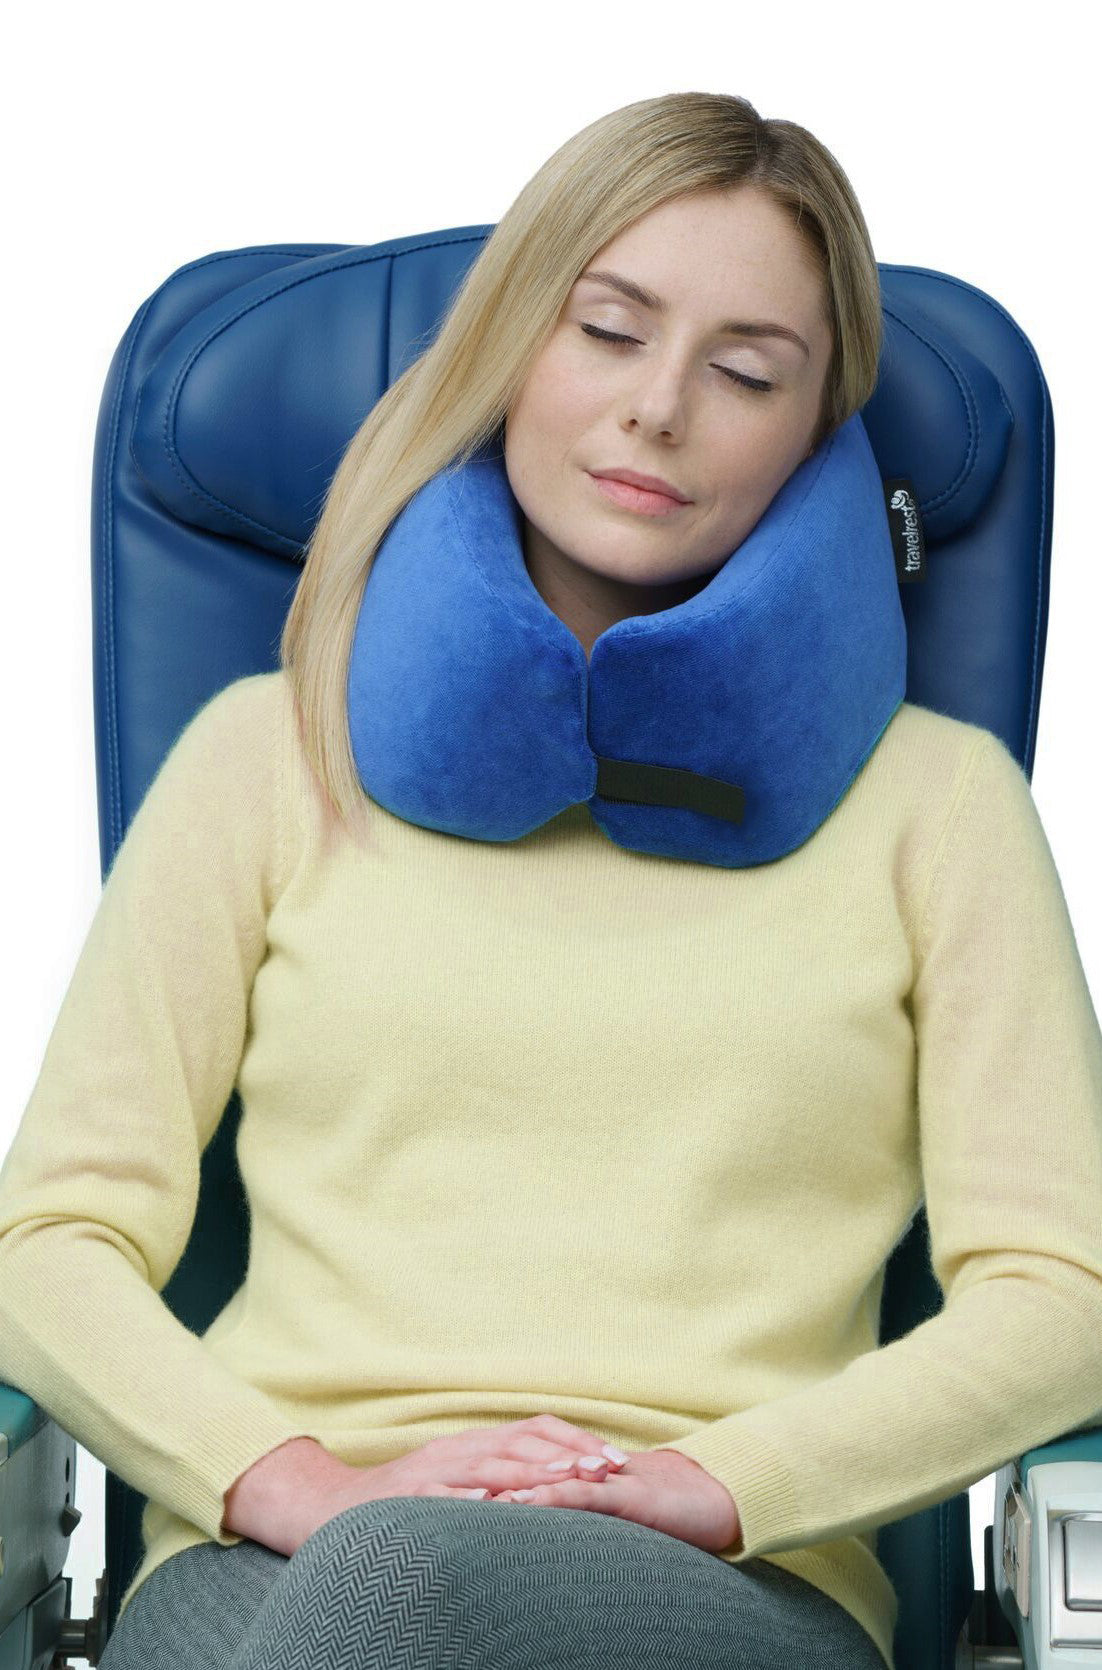 Sky Rest Travel Pillow Supports The Upper Body For Complete Comfort